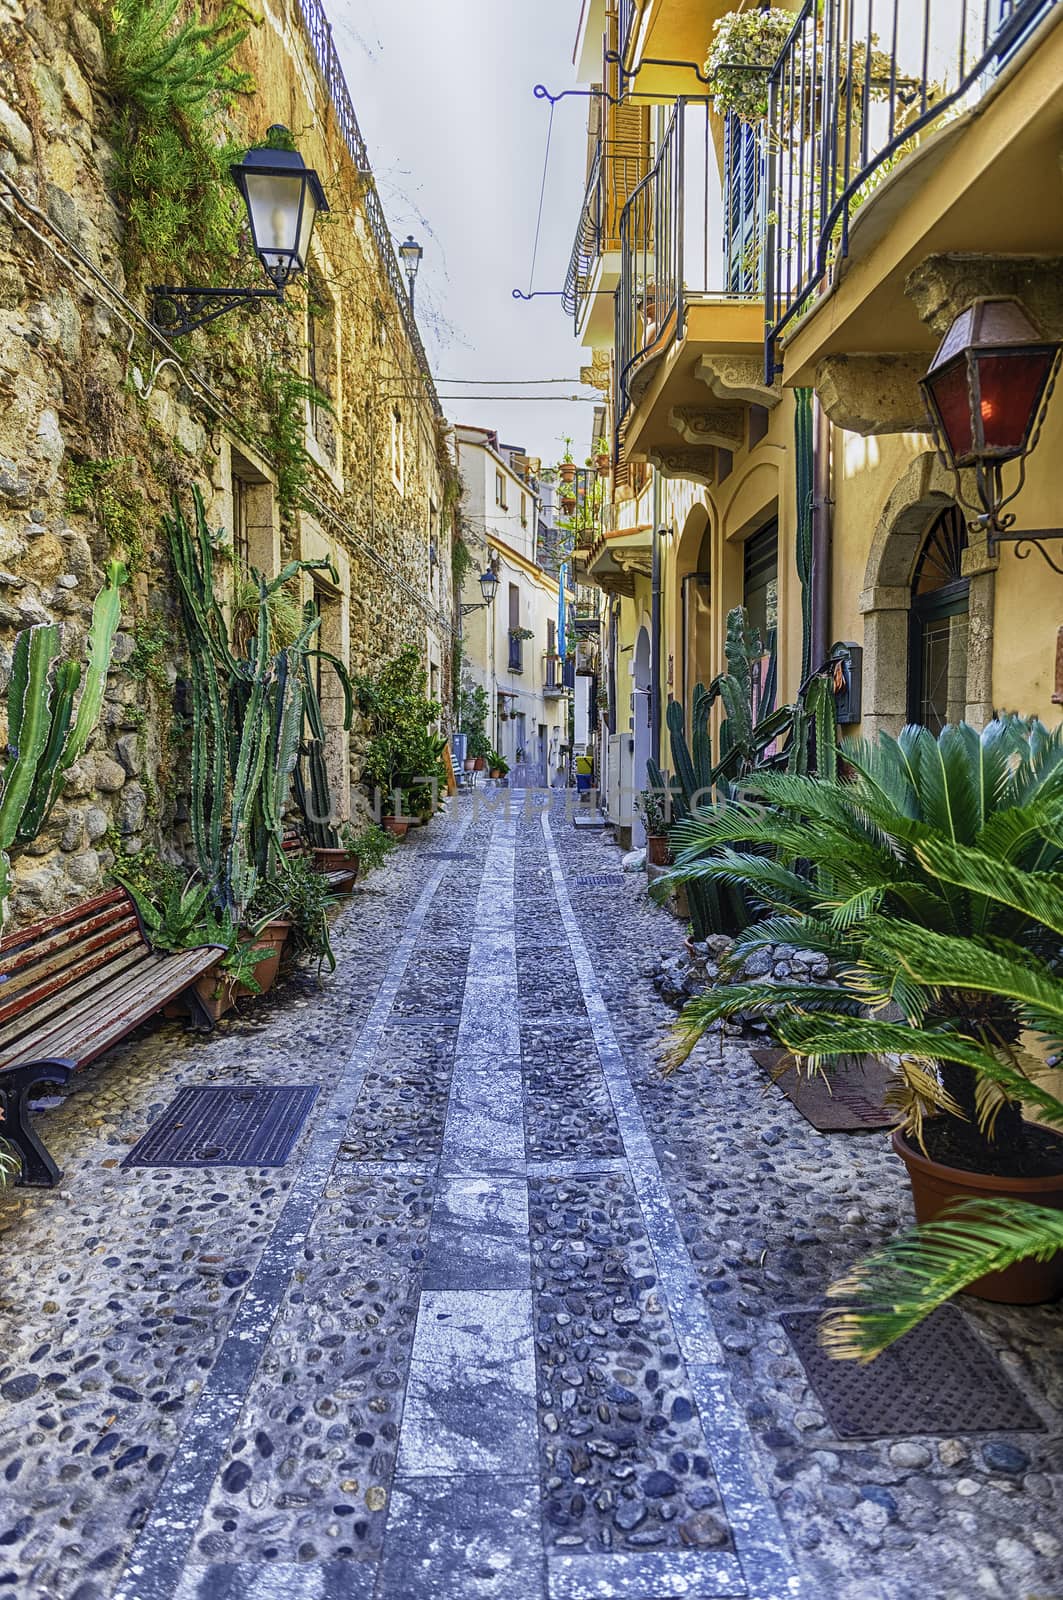 Picturesque streets and alleys in the seaside village of Chianalea, fraction of Scilla, Calabria, Italy